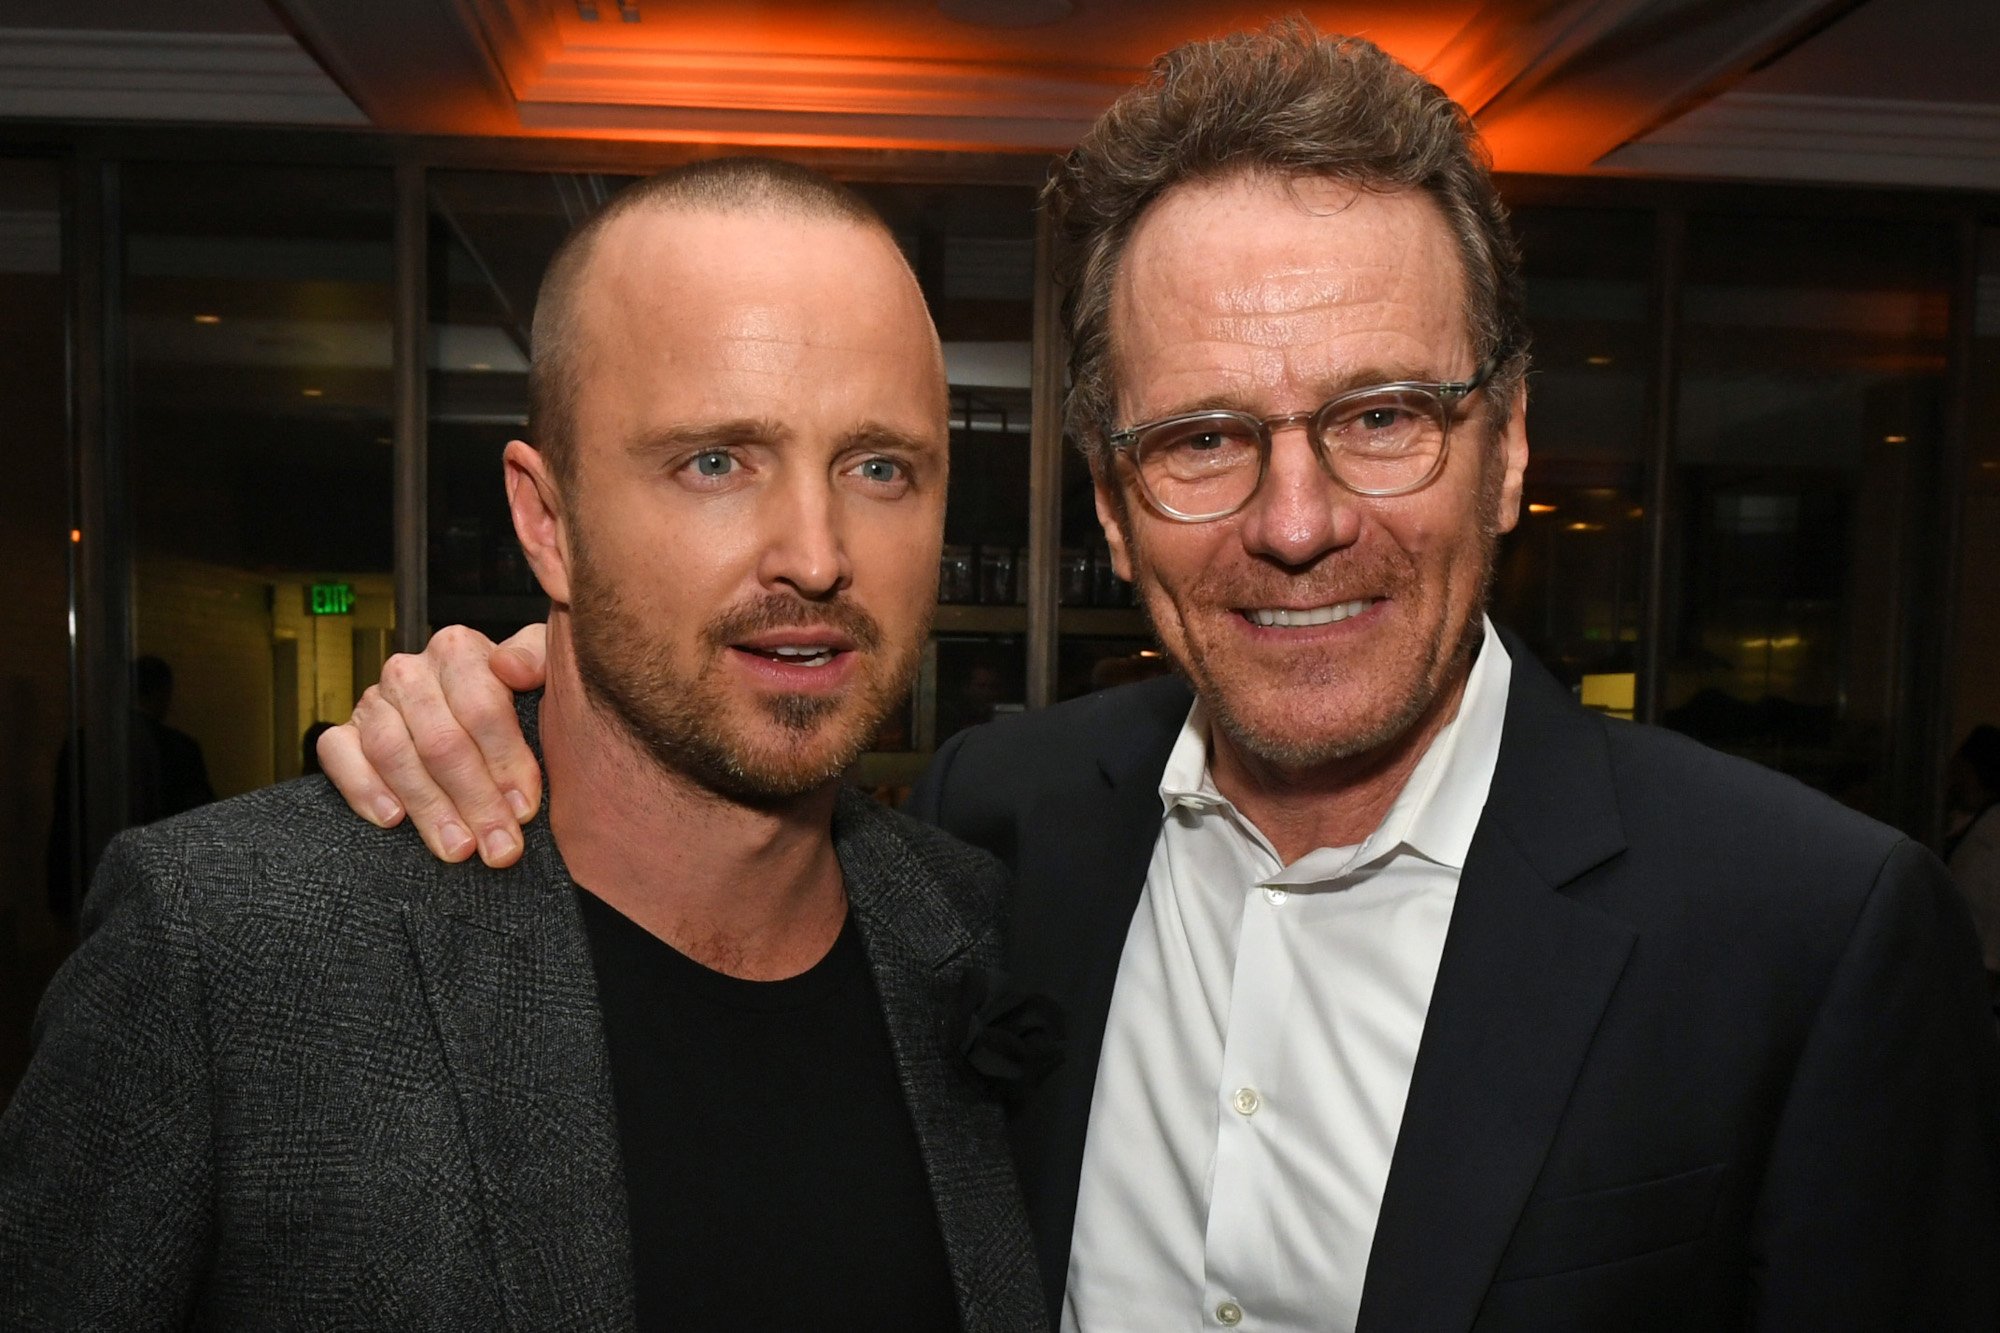 Walter White star Bryan Cranston on the left with his arm around 'Breaking Bad' co-star Aaron Paul. They're both wearing suits, and Aaron is looking to the left.